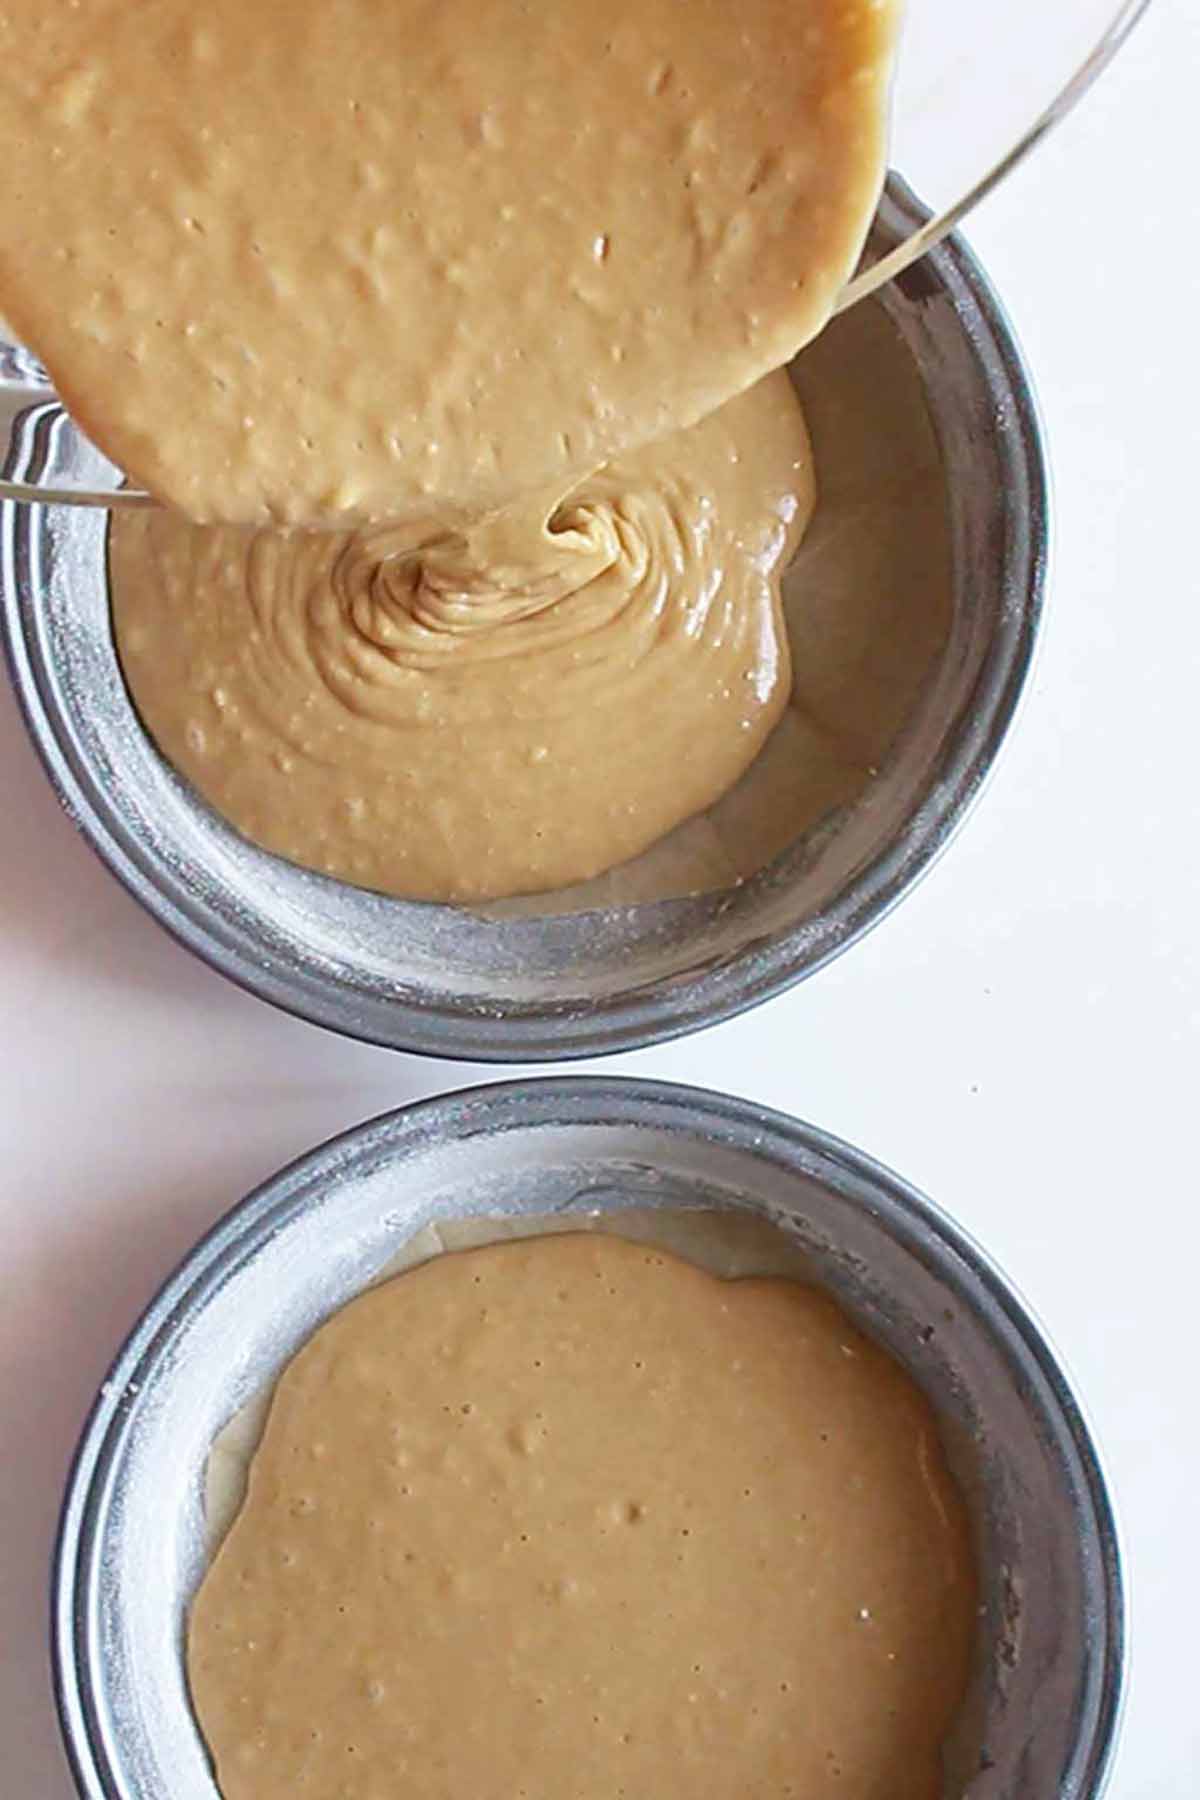 Pouring Dairy Free Coffee Batter Into Cake Tins